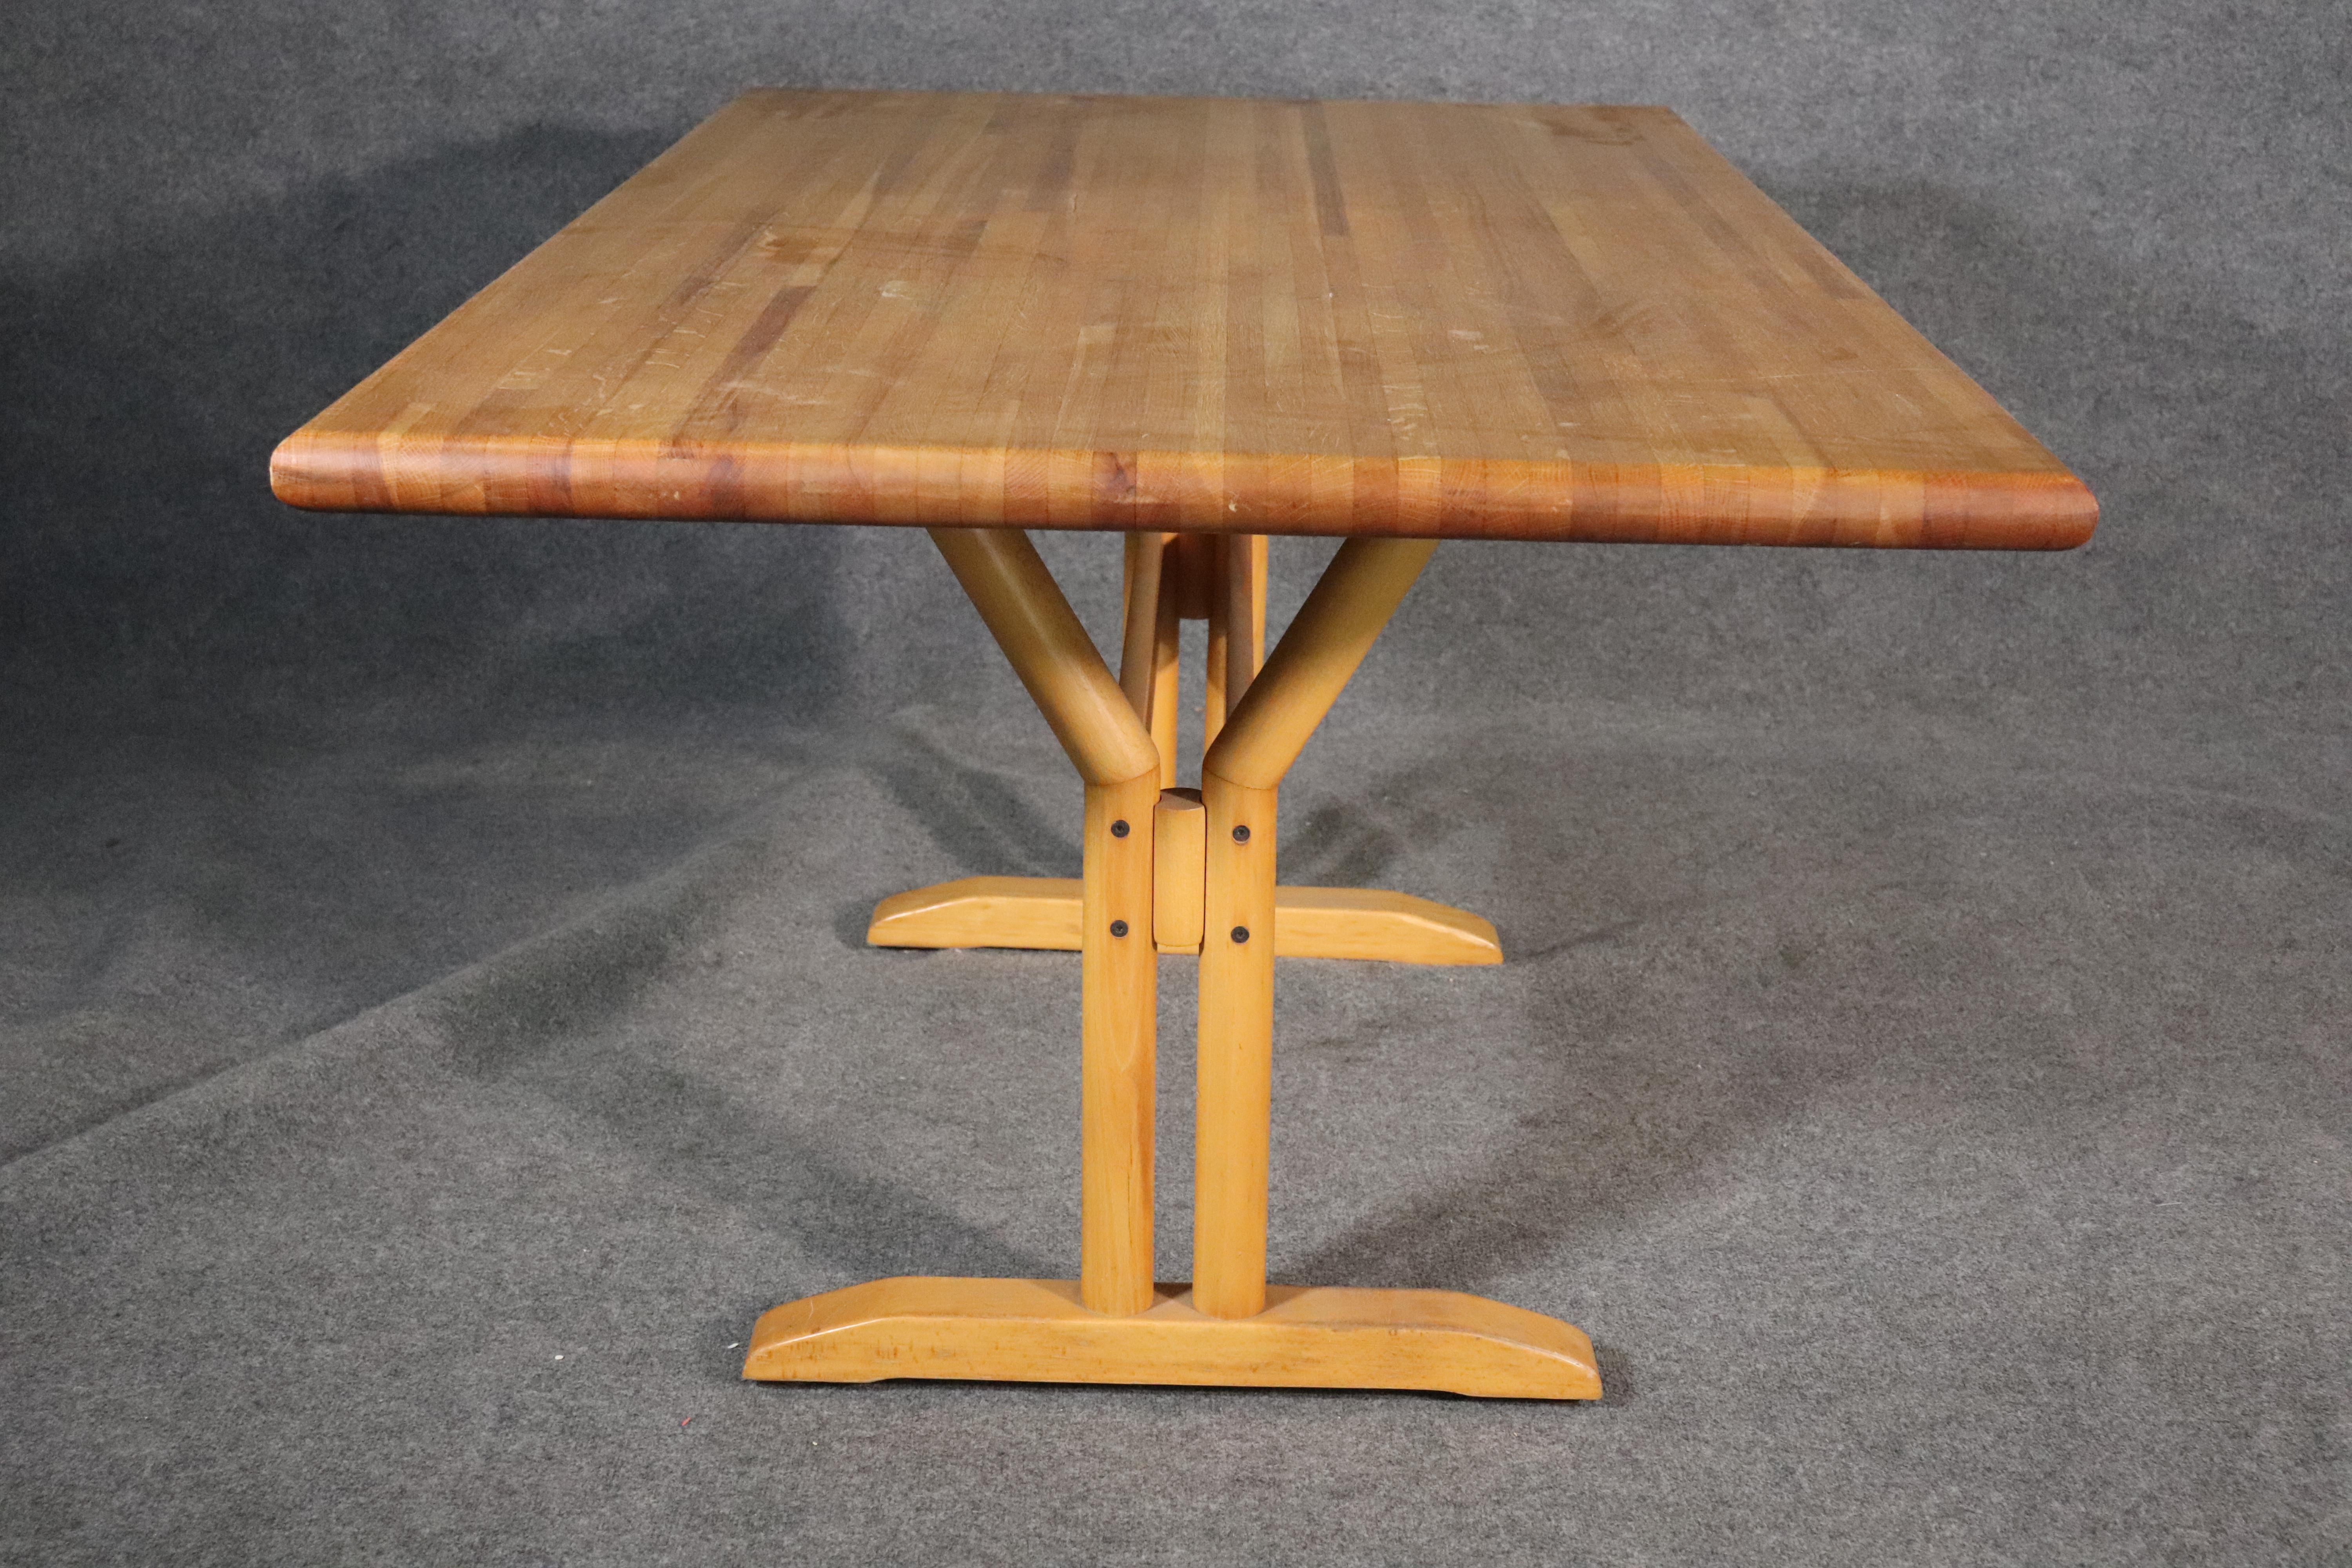 Farm house style wood dining table with a butcher block top. Bright oak wood coloring table on a Y-shape base.
Please confirm location NY or NJ.